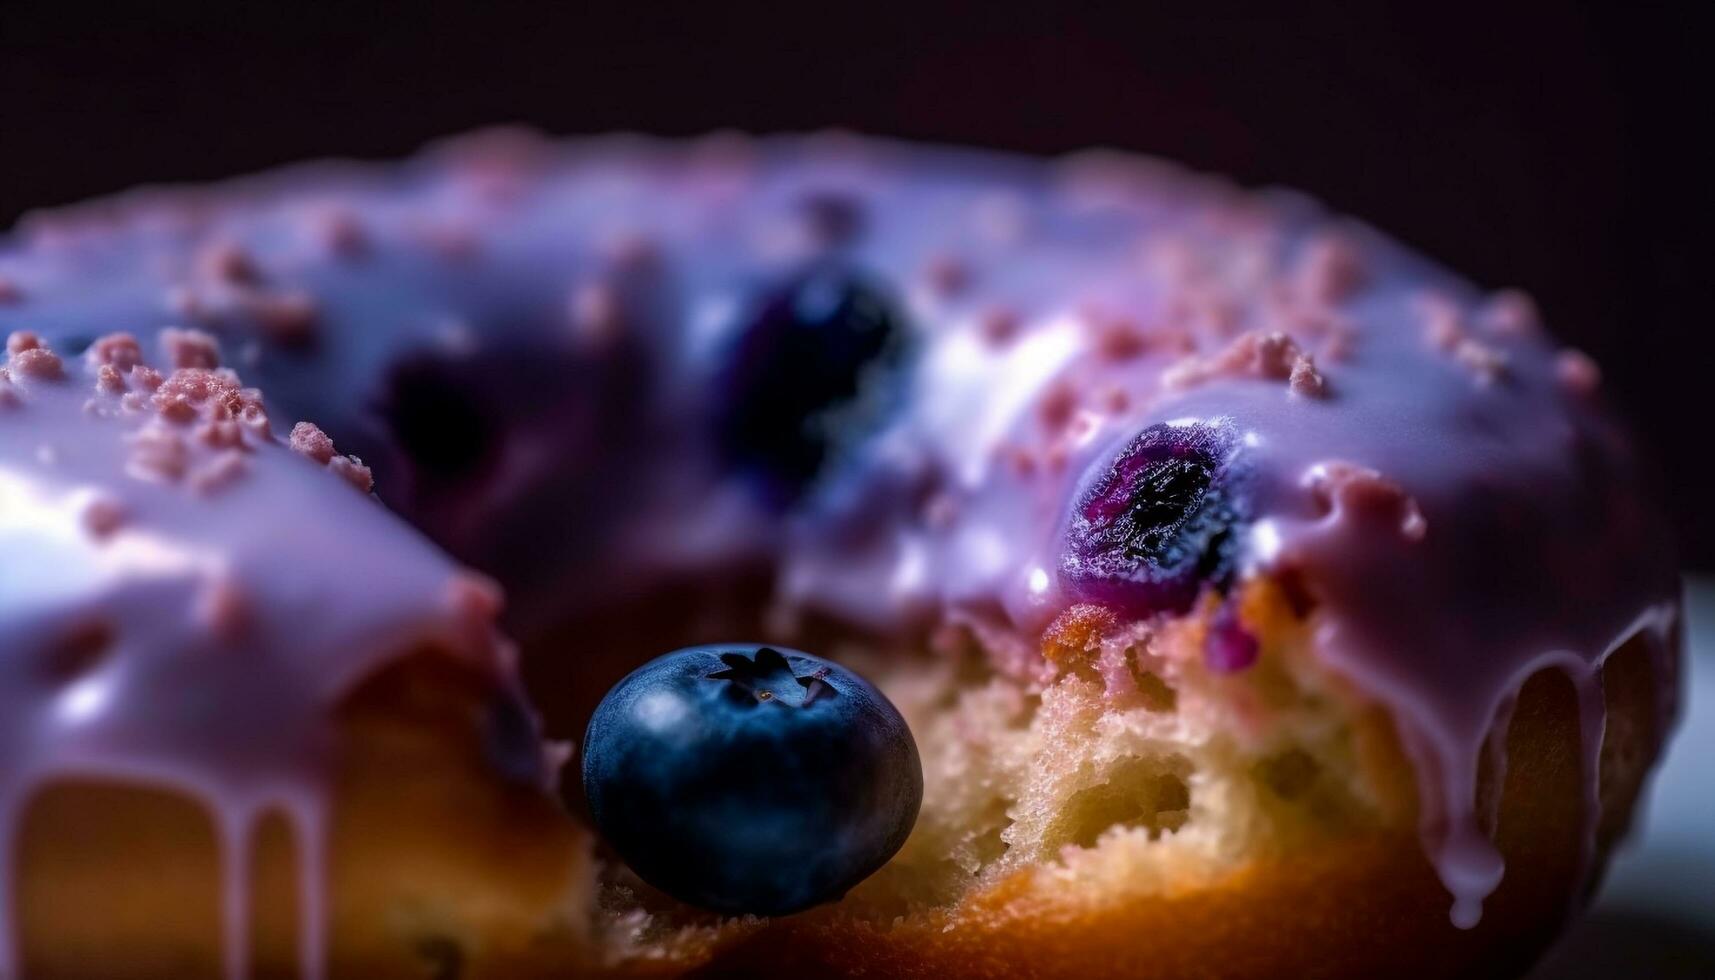 Sweet berry cheesecake, a gourmet indulgence delight generated by AI photo